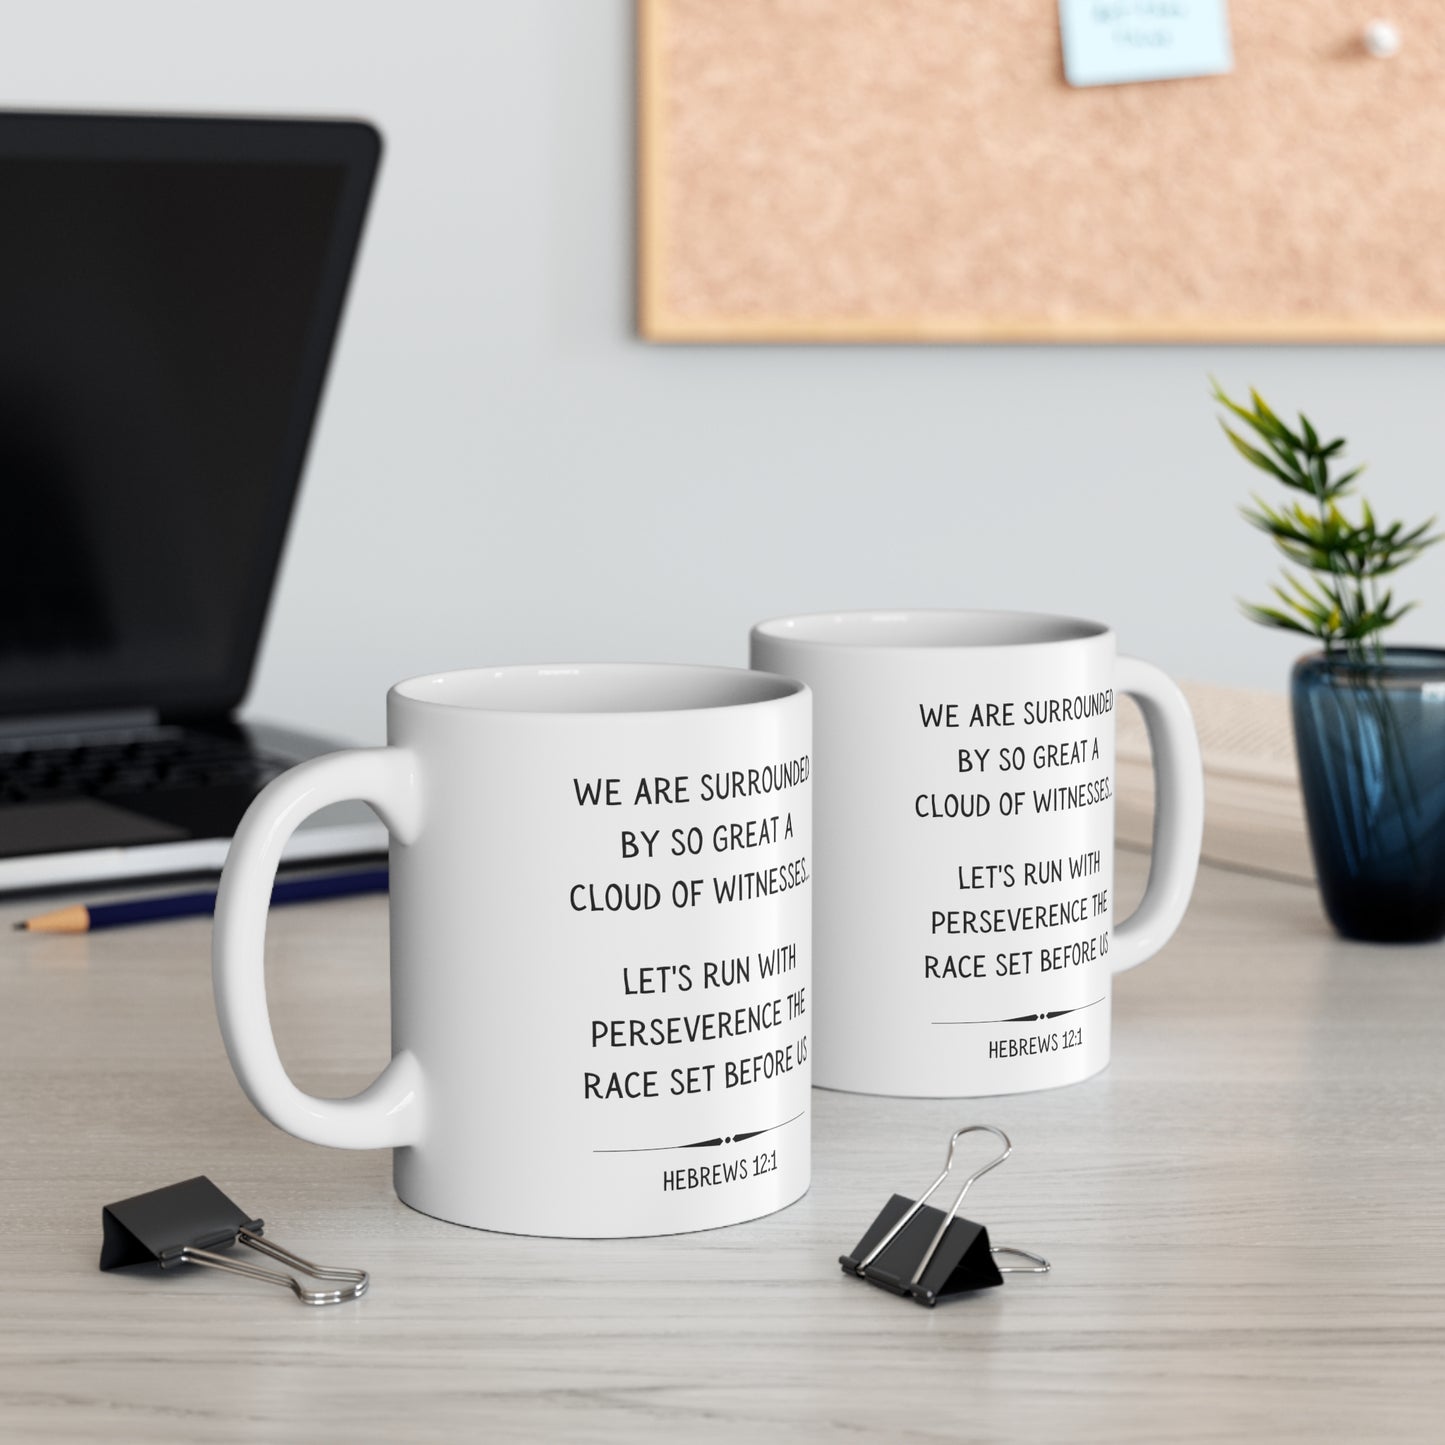 Scripture Mug, We Are Surrounded By A Great Cloud of Witnesses, Hebrews 12:1